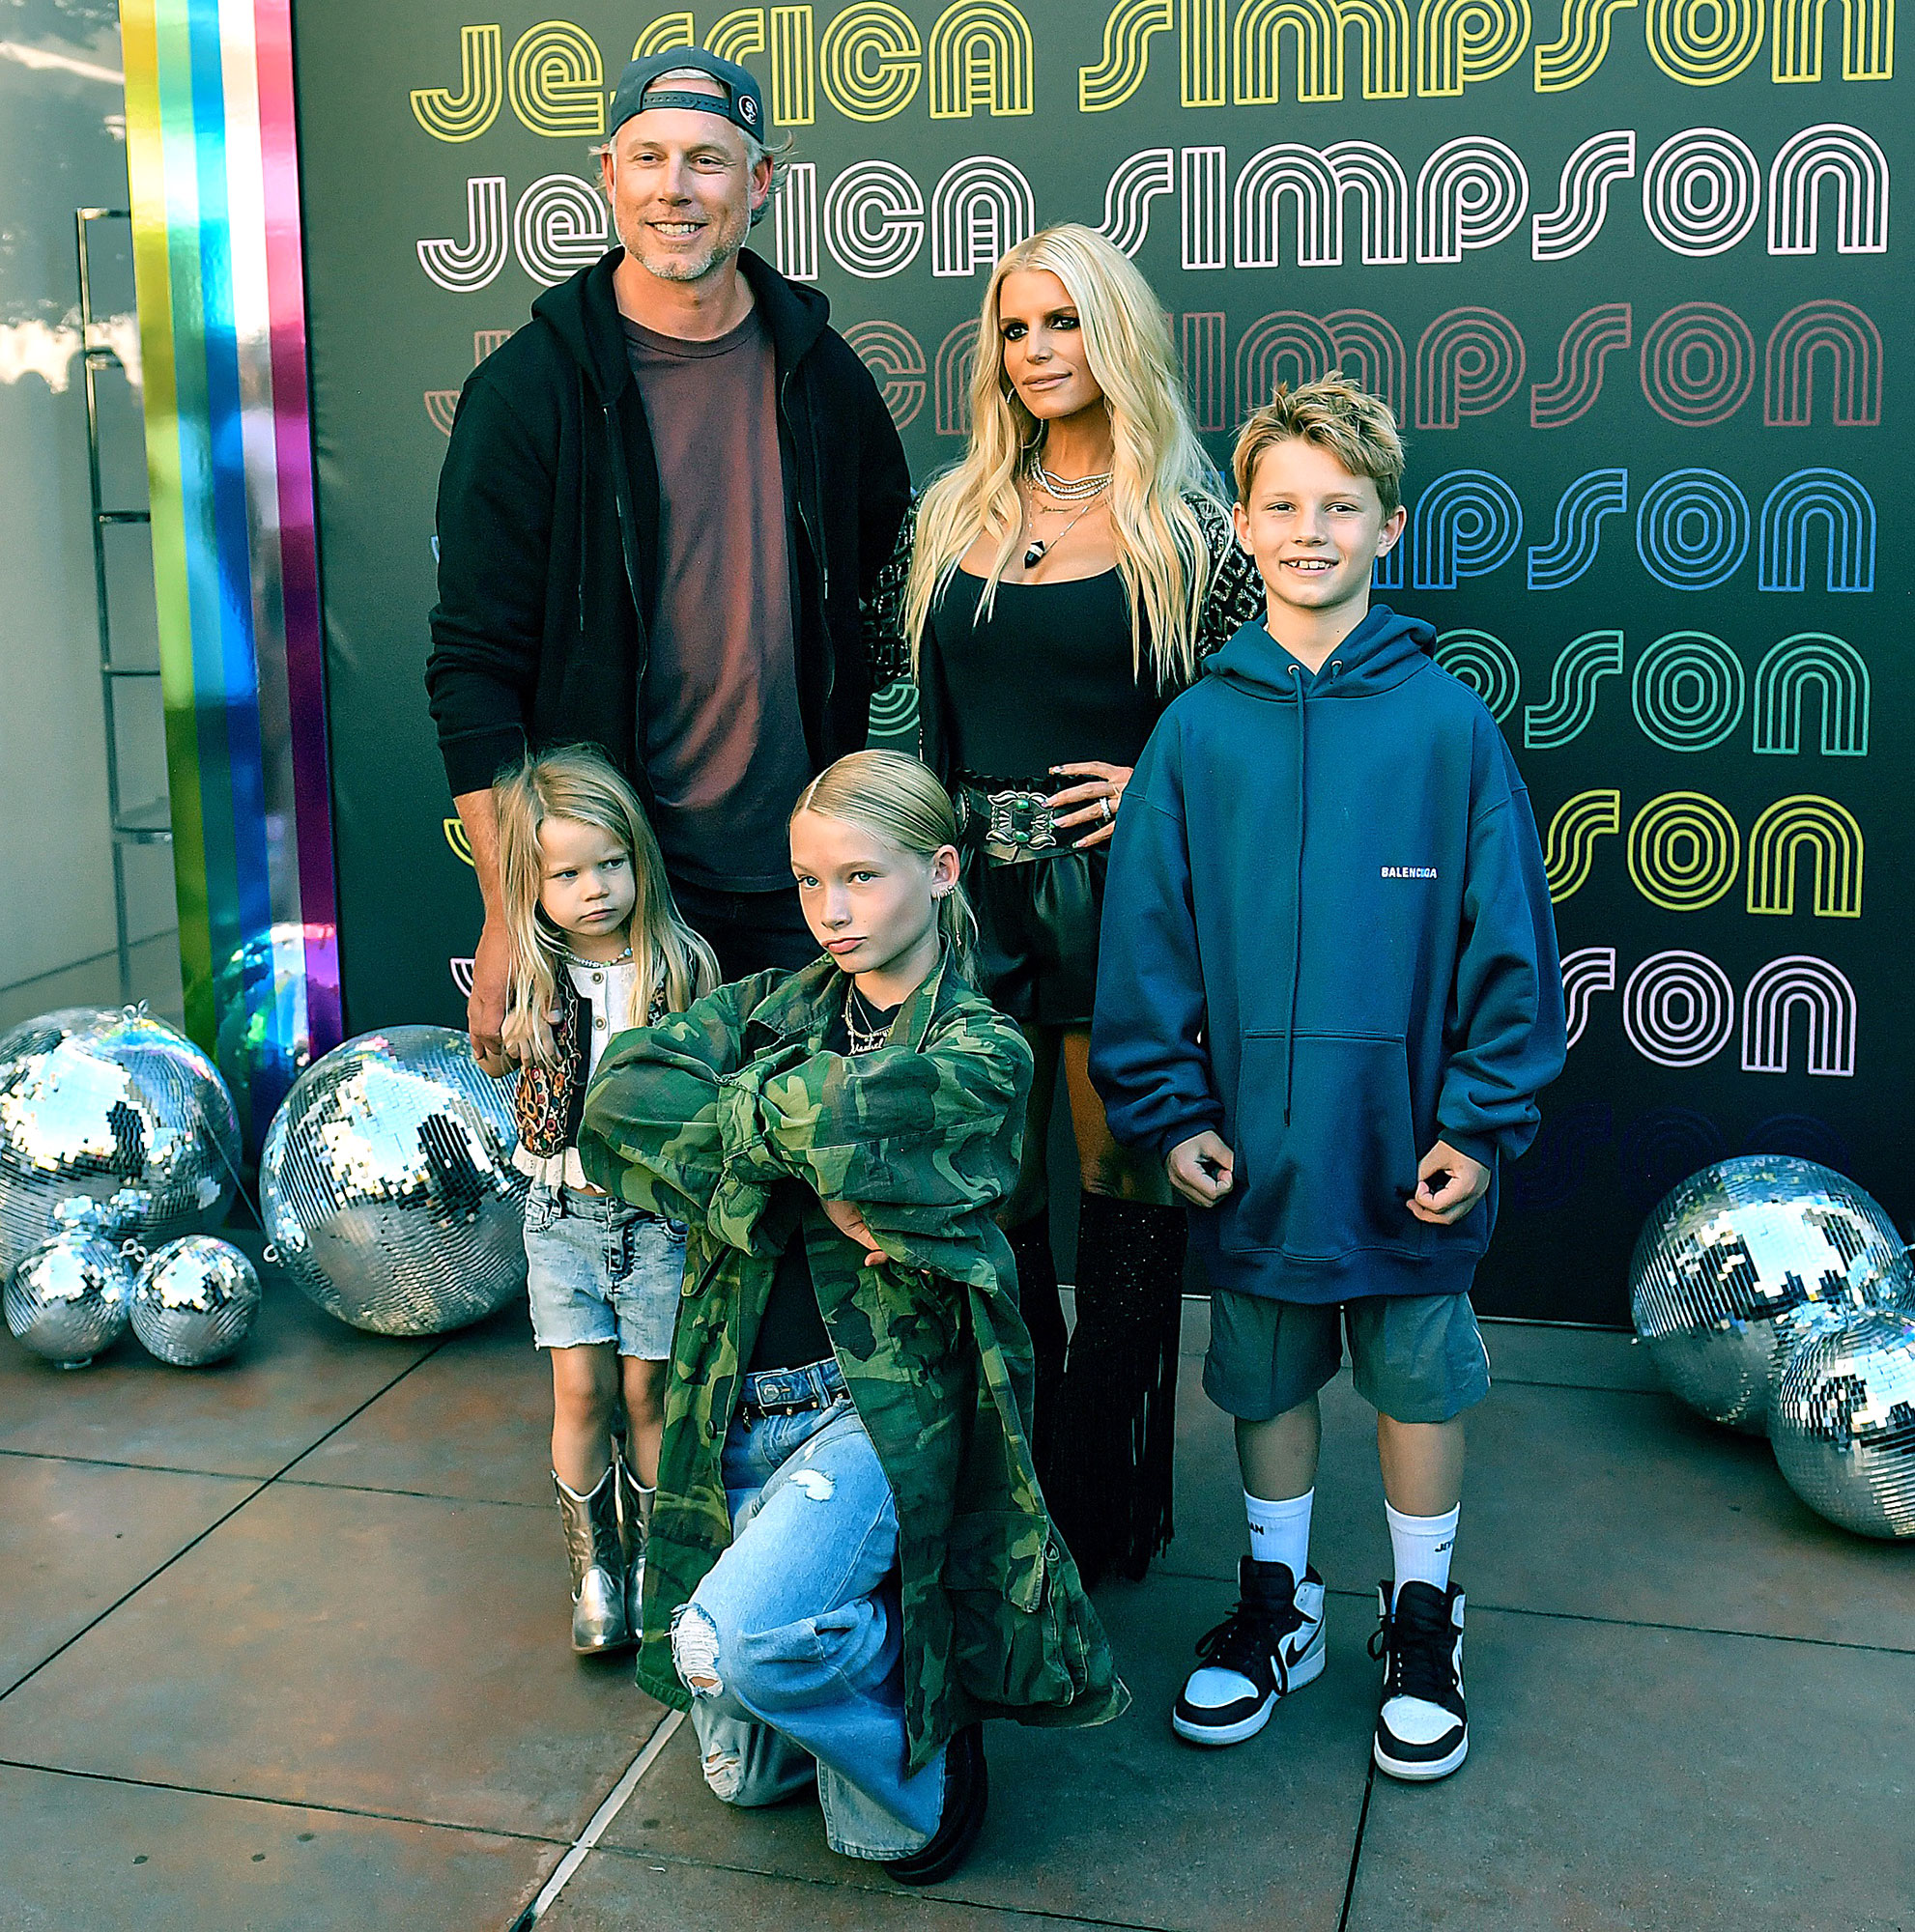 Jessica Simpson's Husband and 3 Kids Join Her at Fashion Launch Event